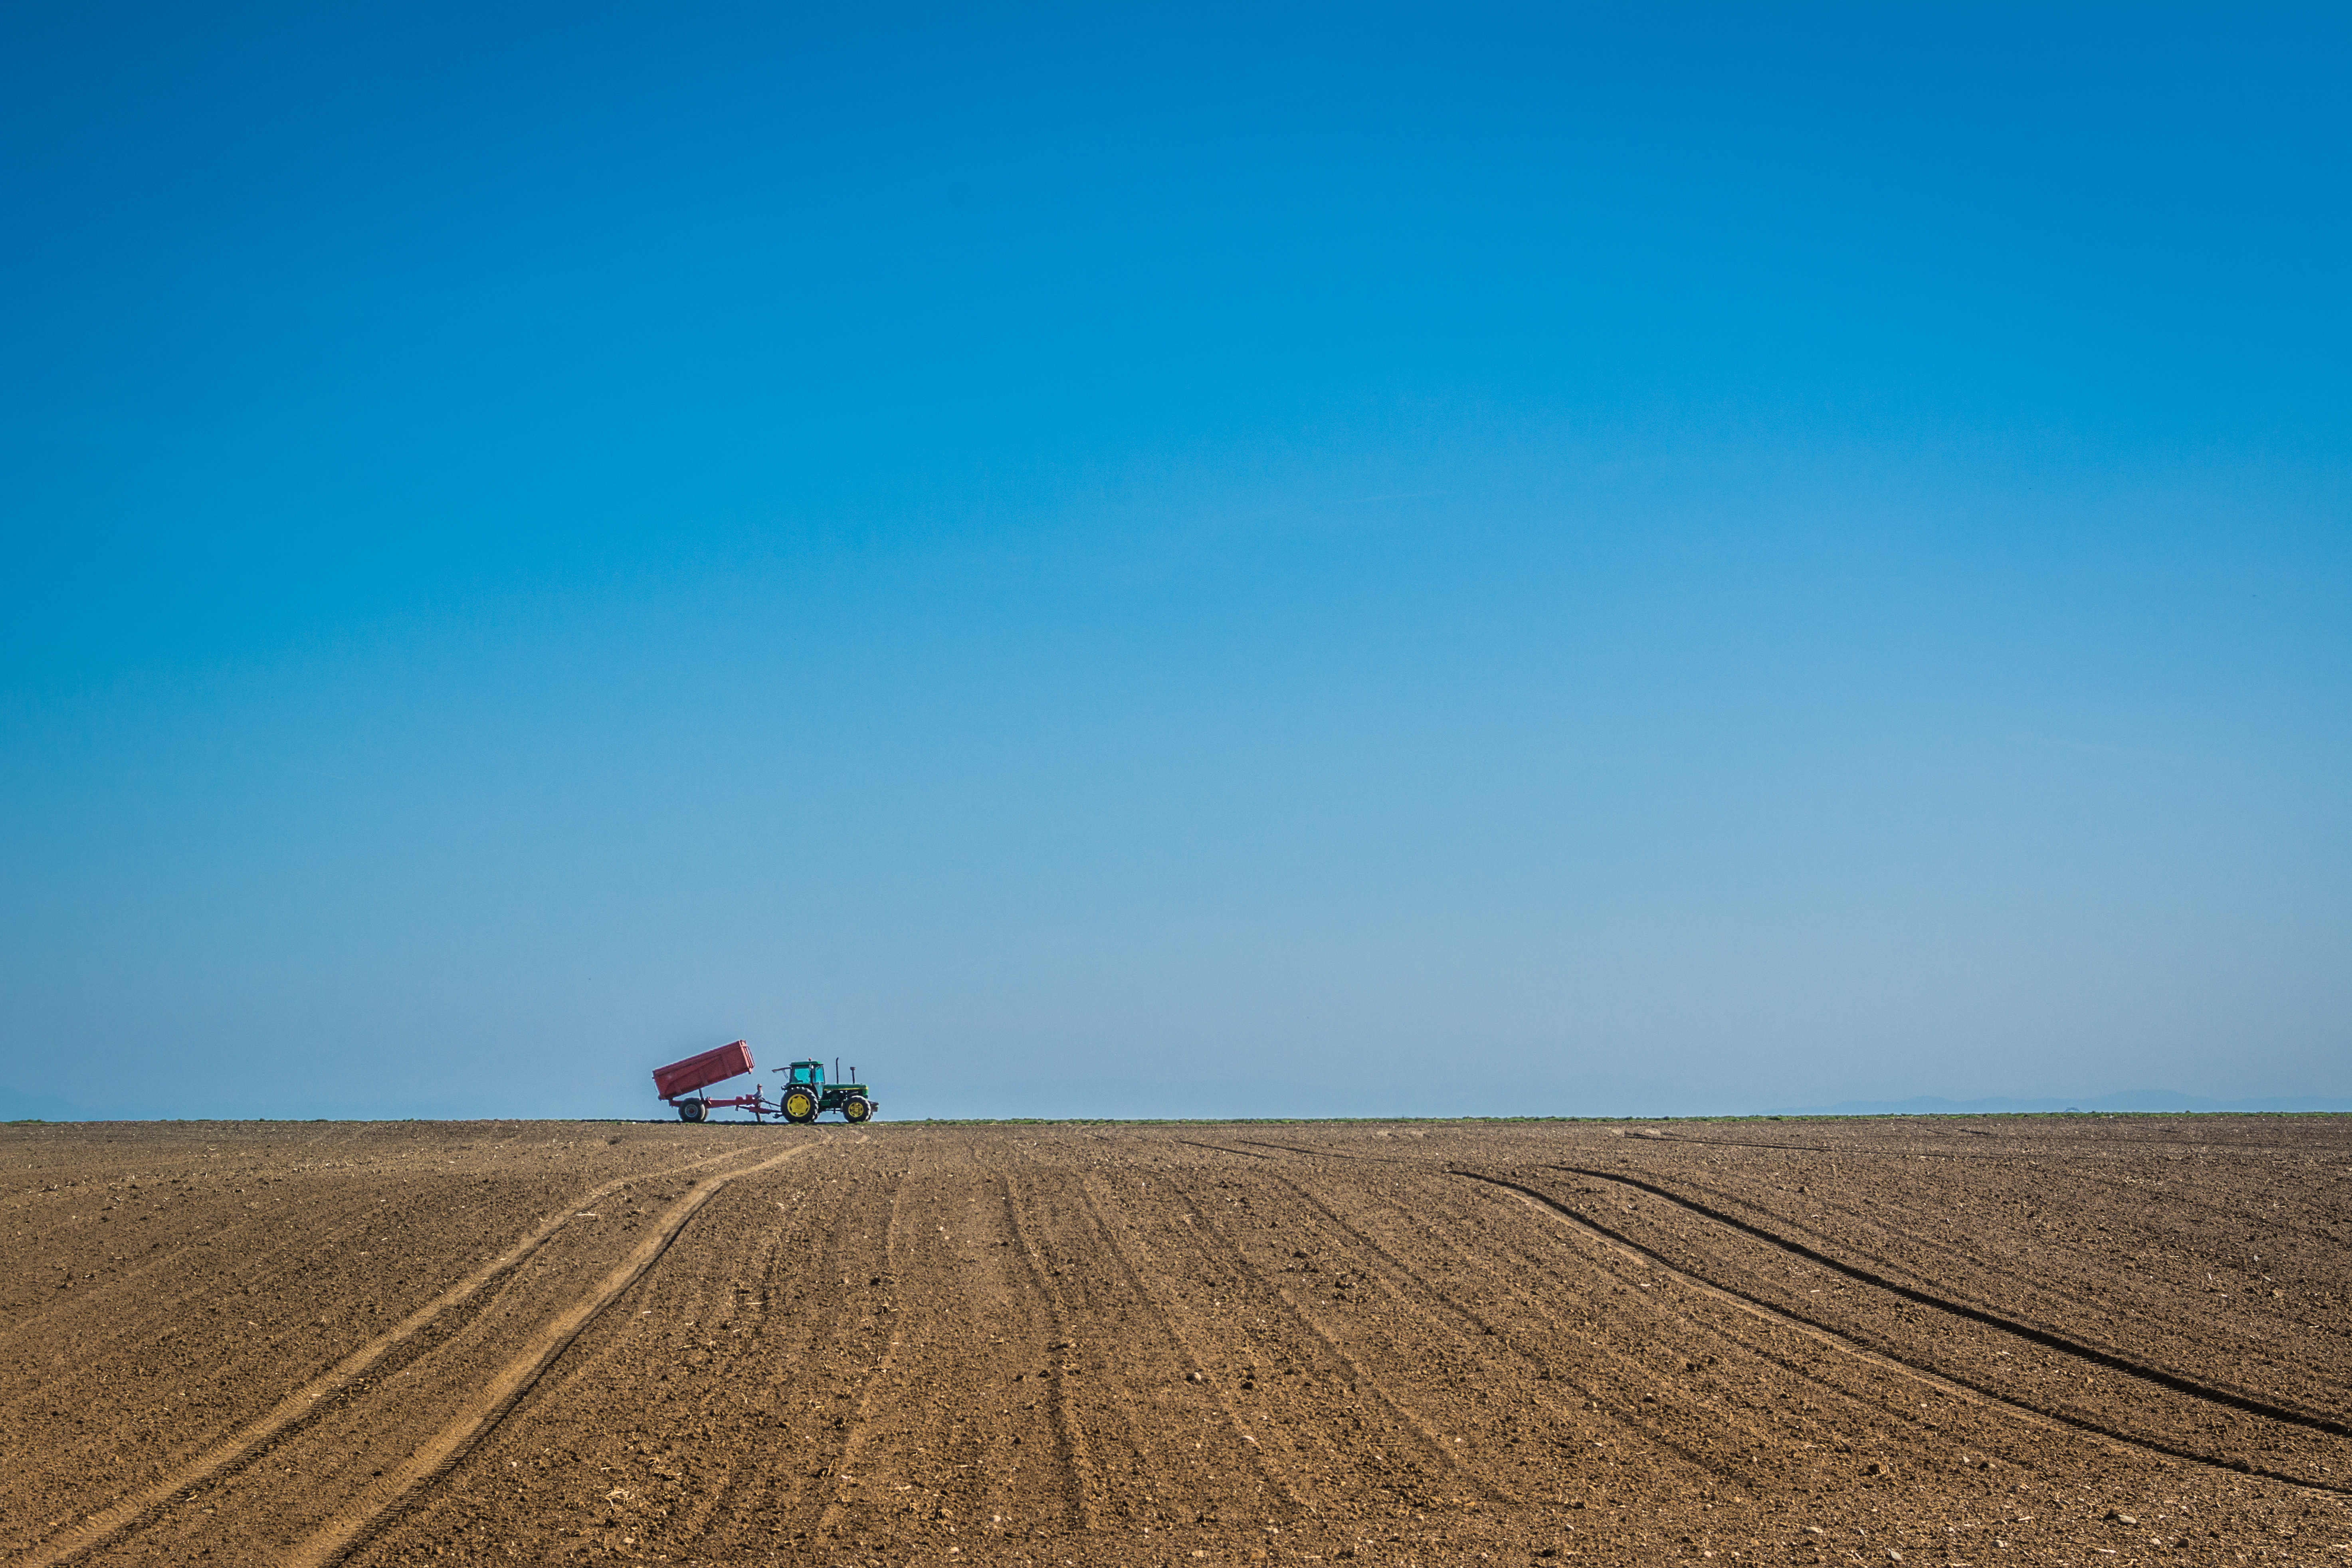 Tractor on arable land and clear sky as background